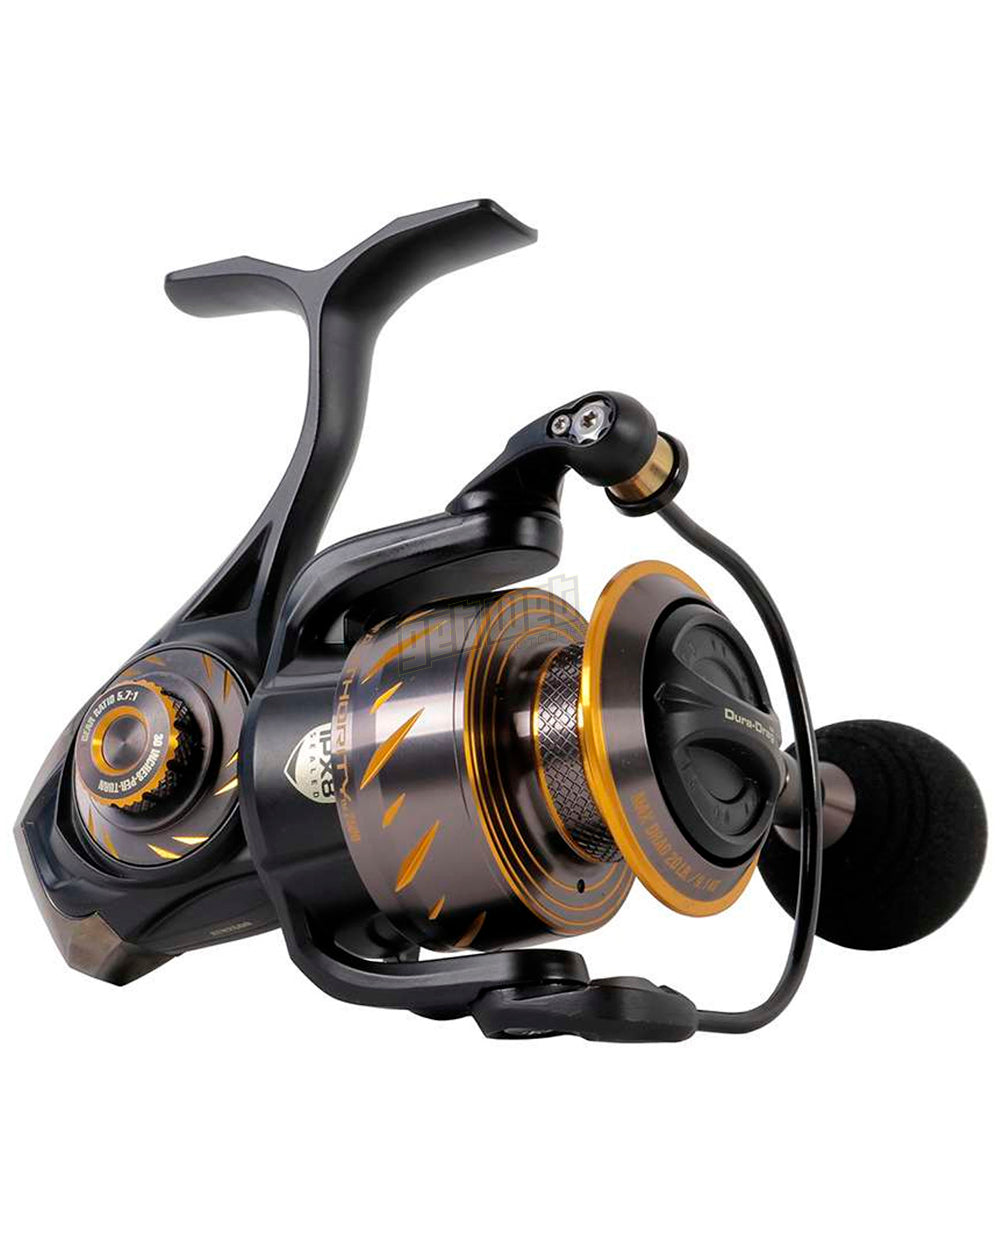 22 Penn Authority 6500 HS Fishing Reels – Get Wet Outdoors